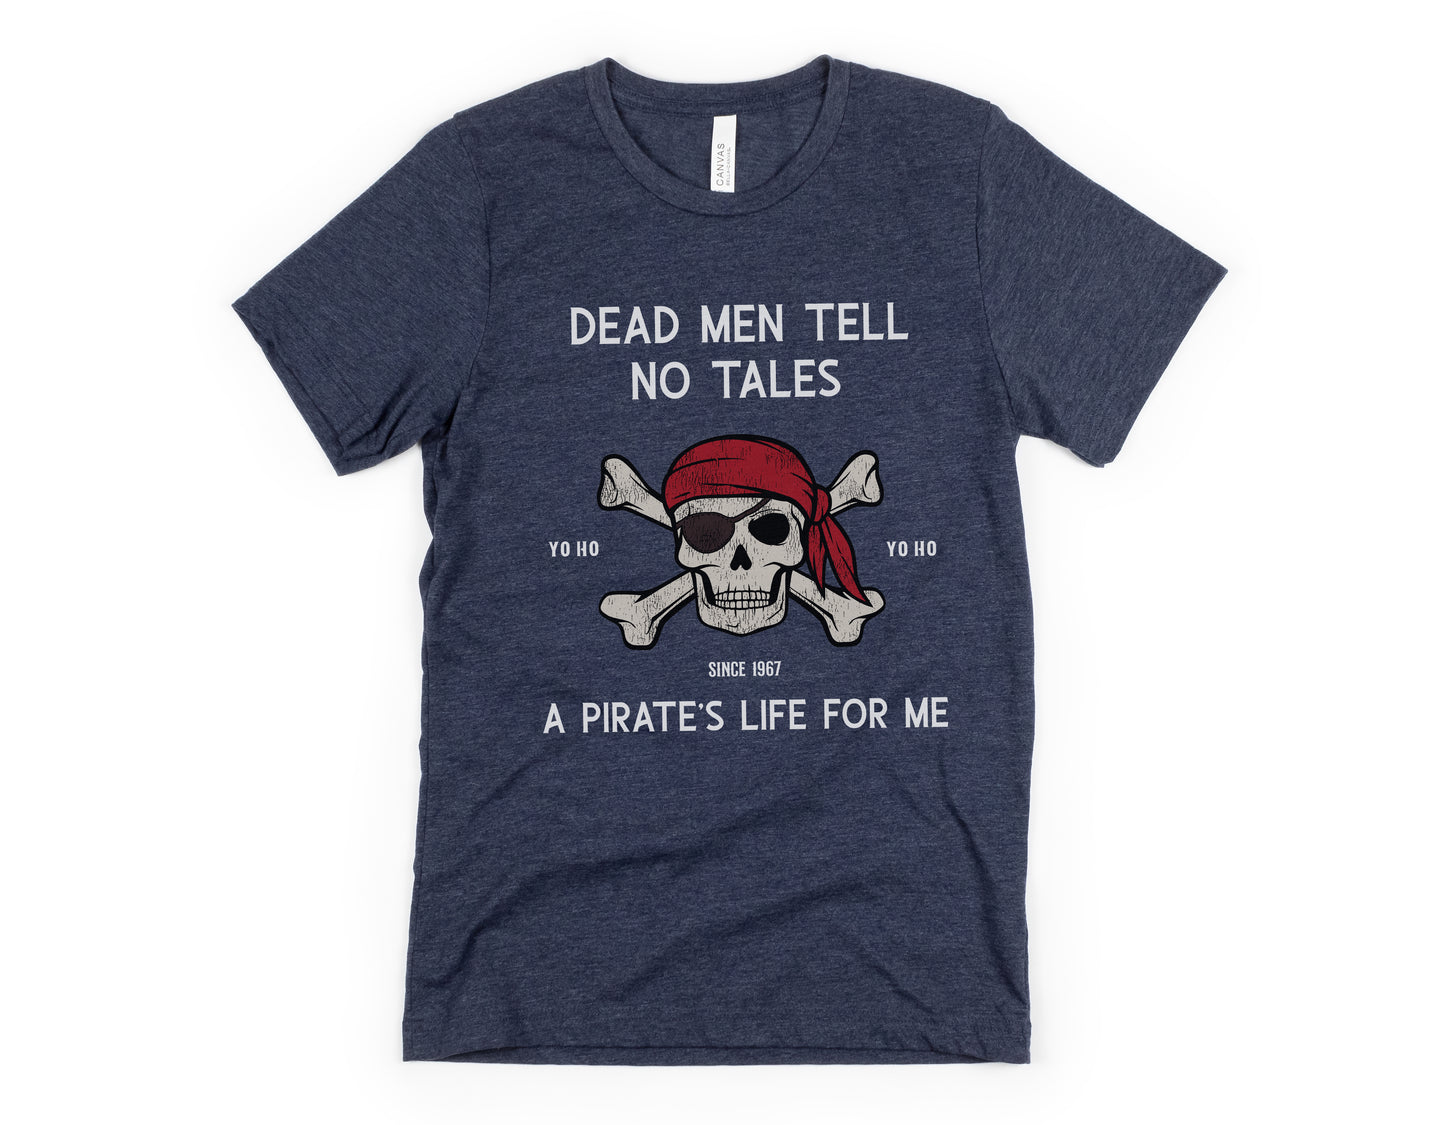 Tell No Tales (Adult) - Front Print